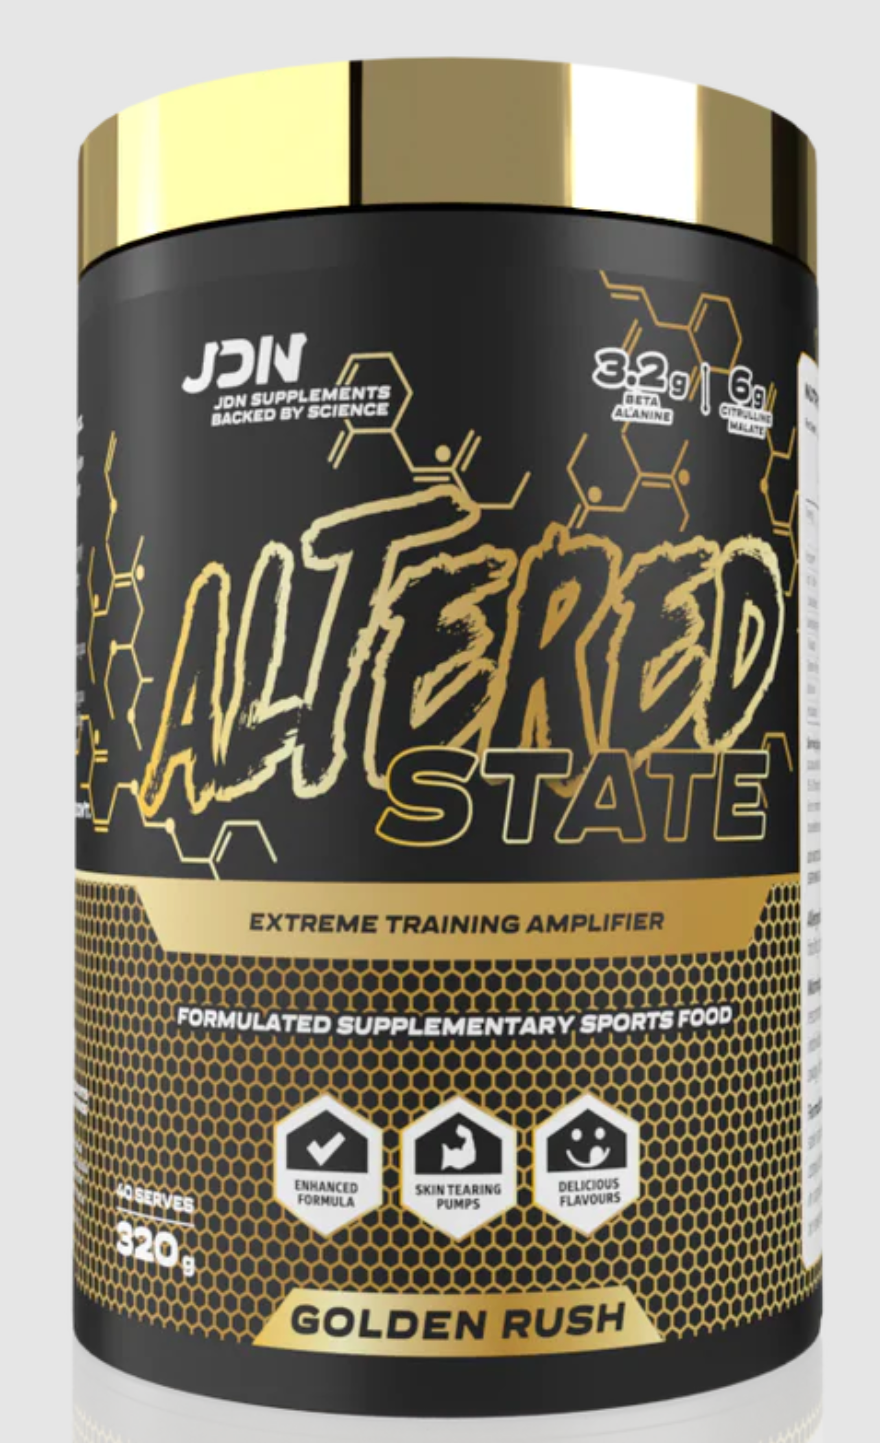 Altered State - JDN Supplements